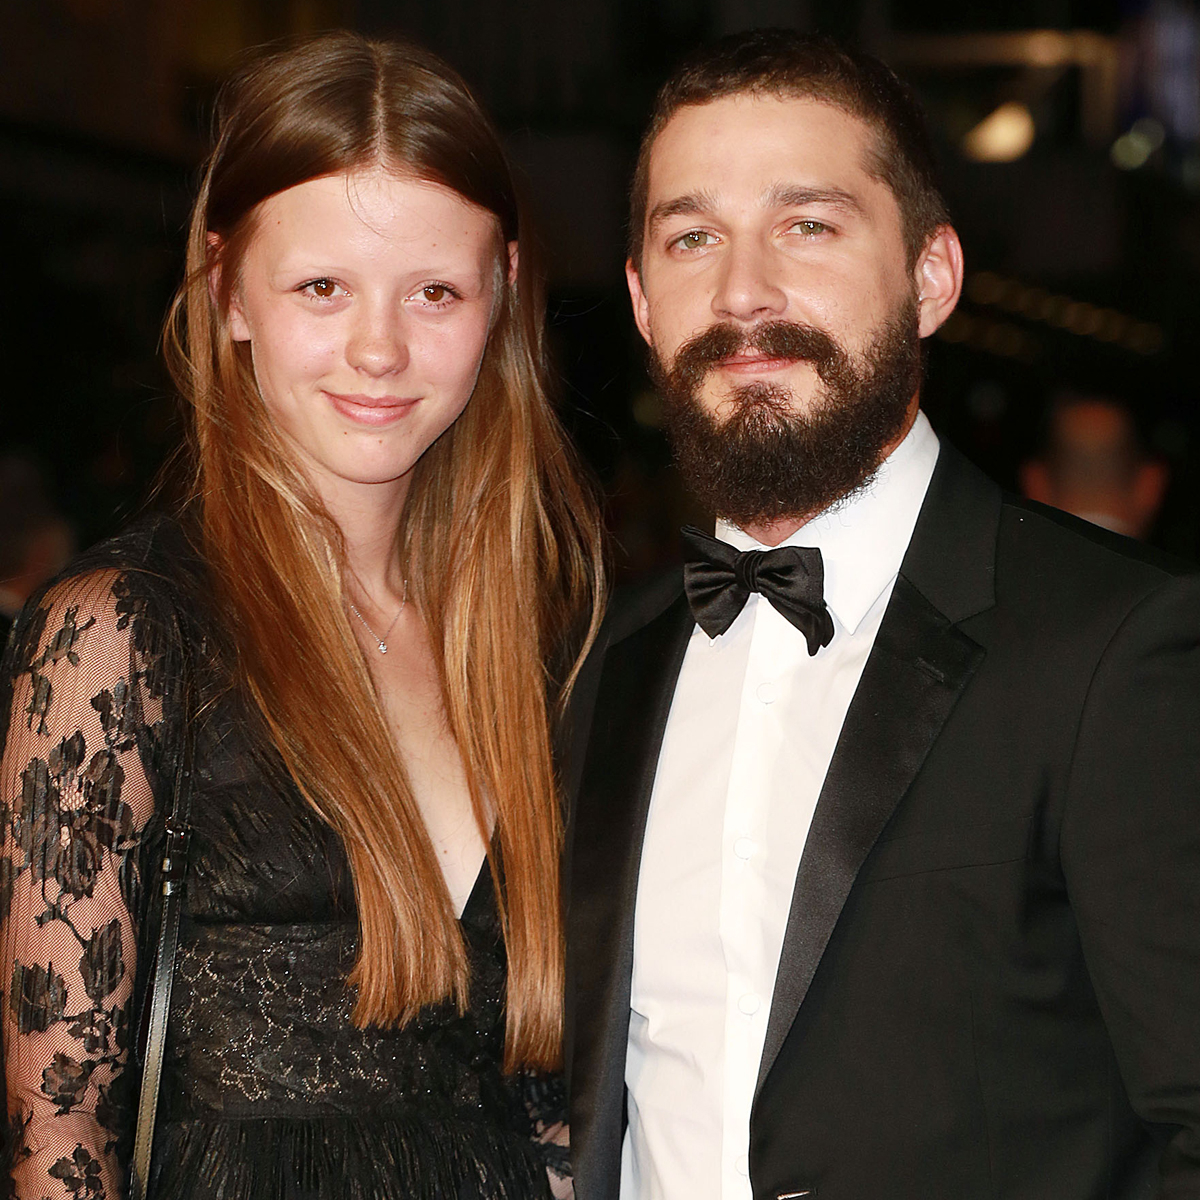 Shia LaBeouf Confirms the Name of His Newborn Child With Wife Mia Goth